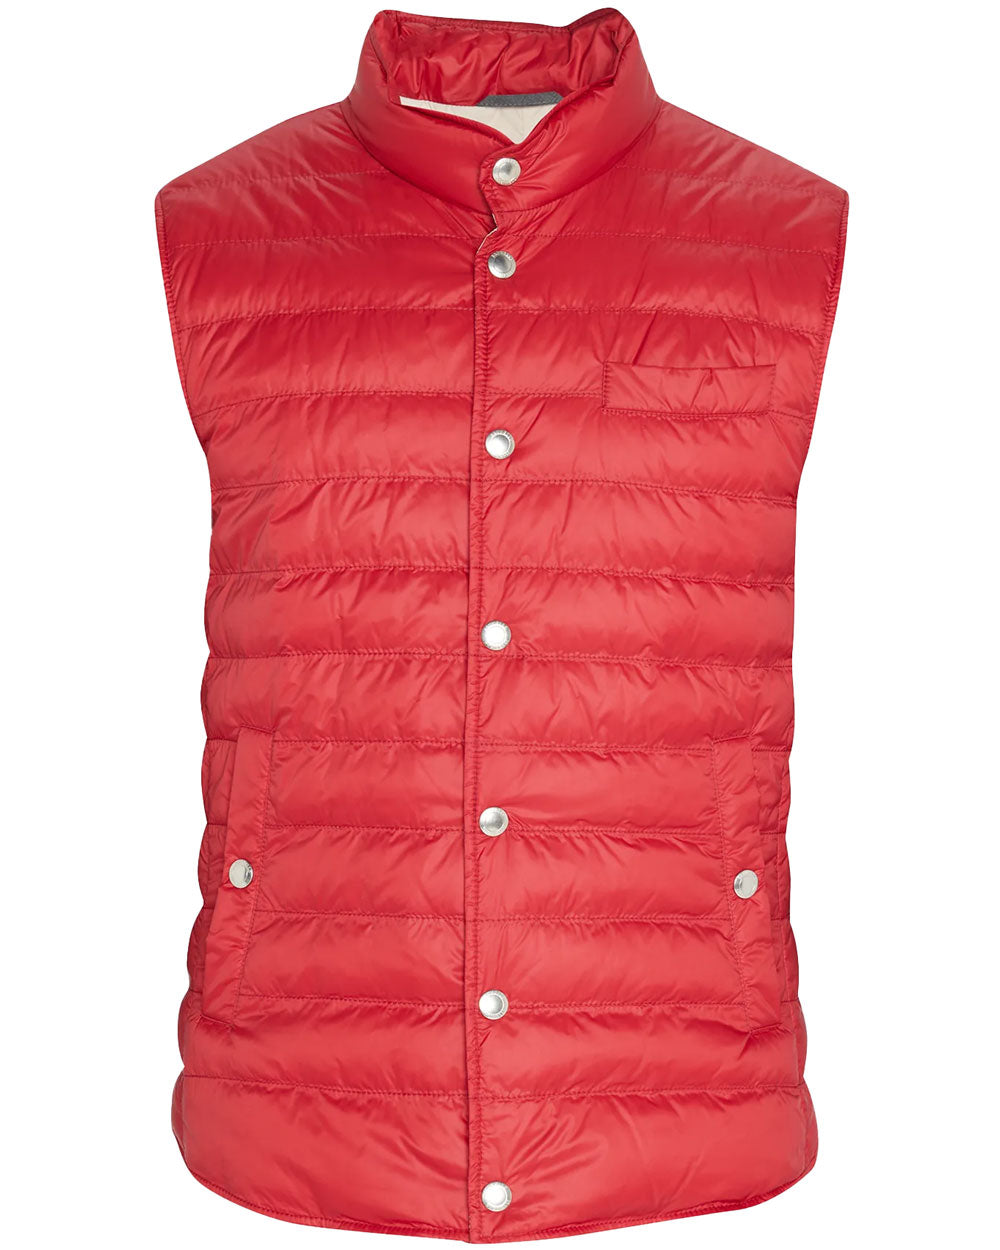 Red Quilted Nylon Snap Vest